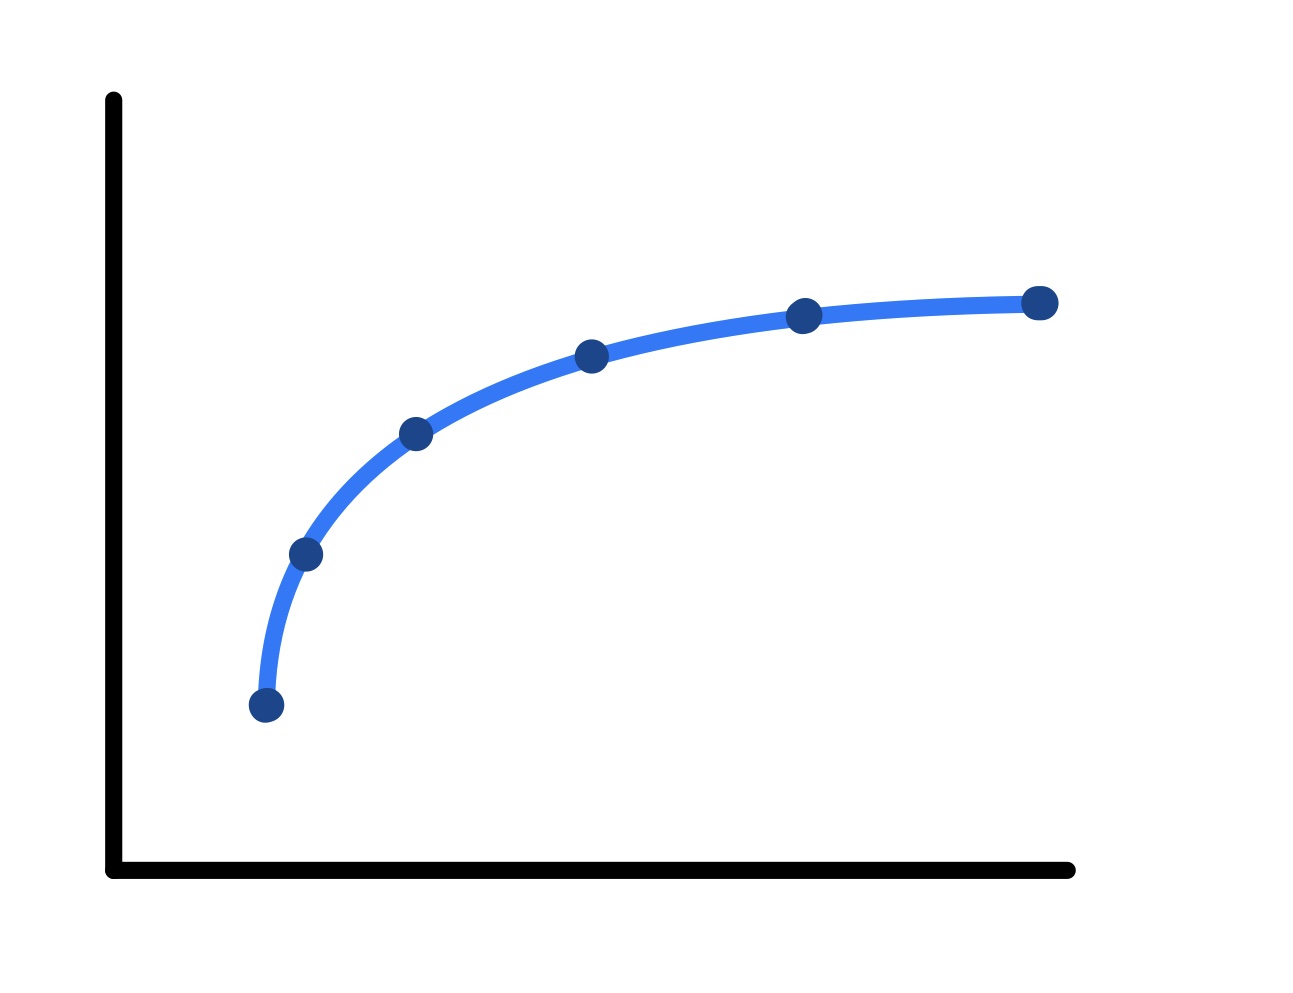 data points  plotting an approximately logarithmic curve